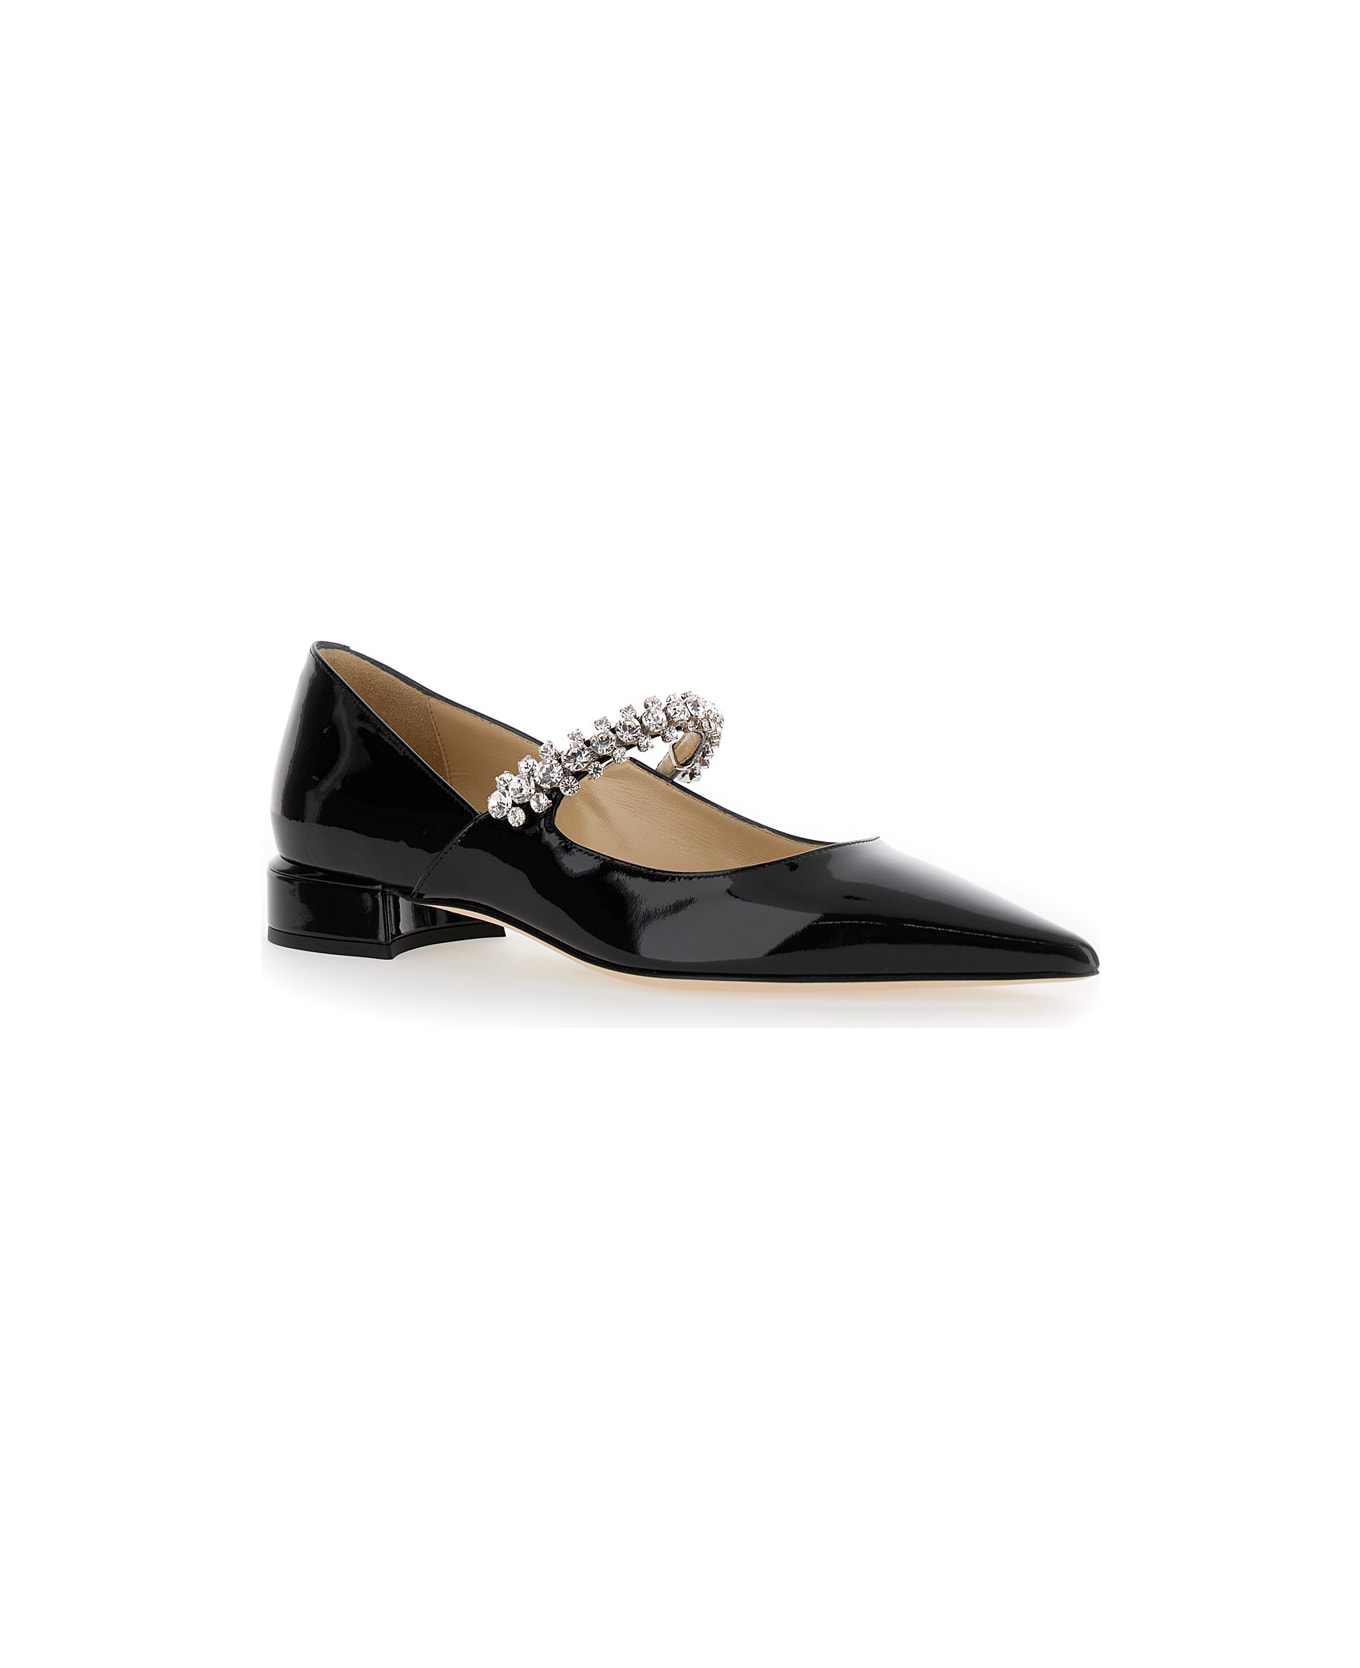 Jimmy Choo Black Ballet Flats With Crystals On Strap In Patent Leather Woman - Black